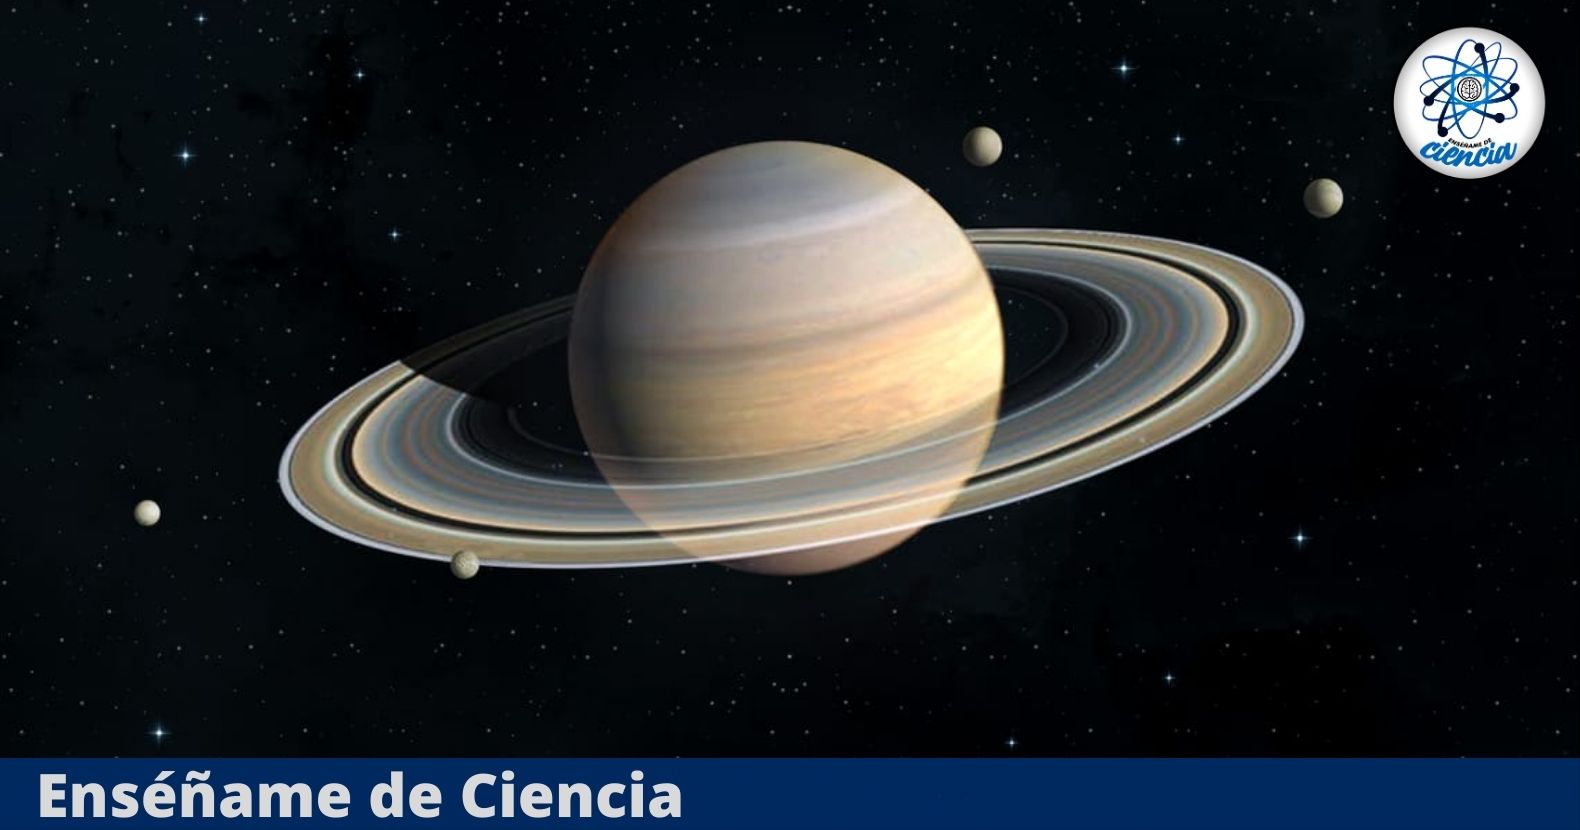 new home?  Scientists have discovered a potentially habitable moon of Saturn – Enseñame de Ciencia